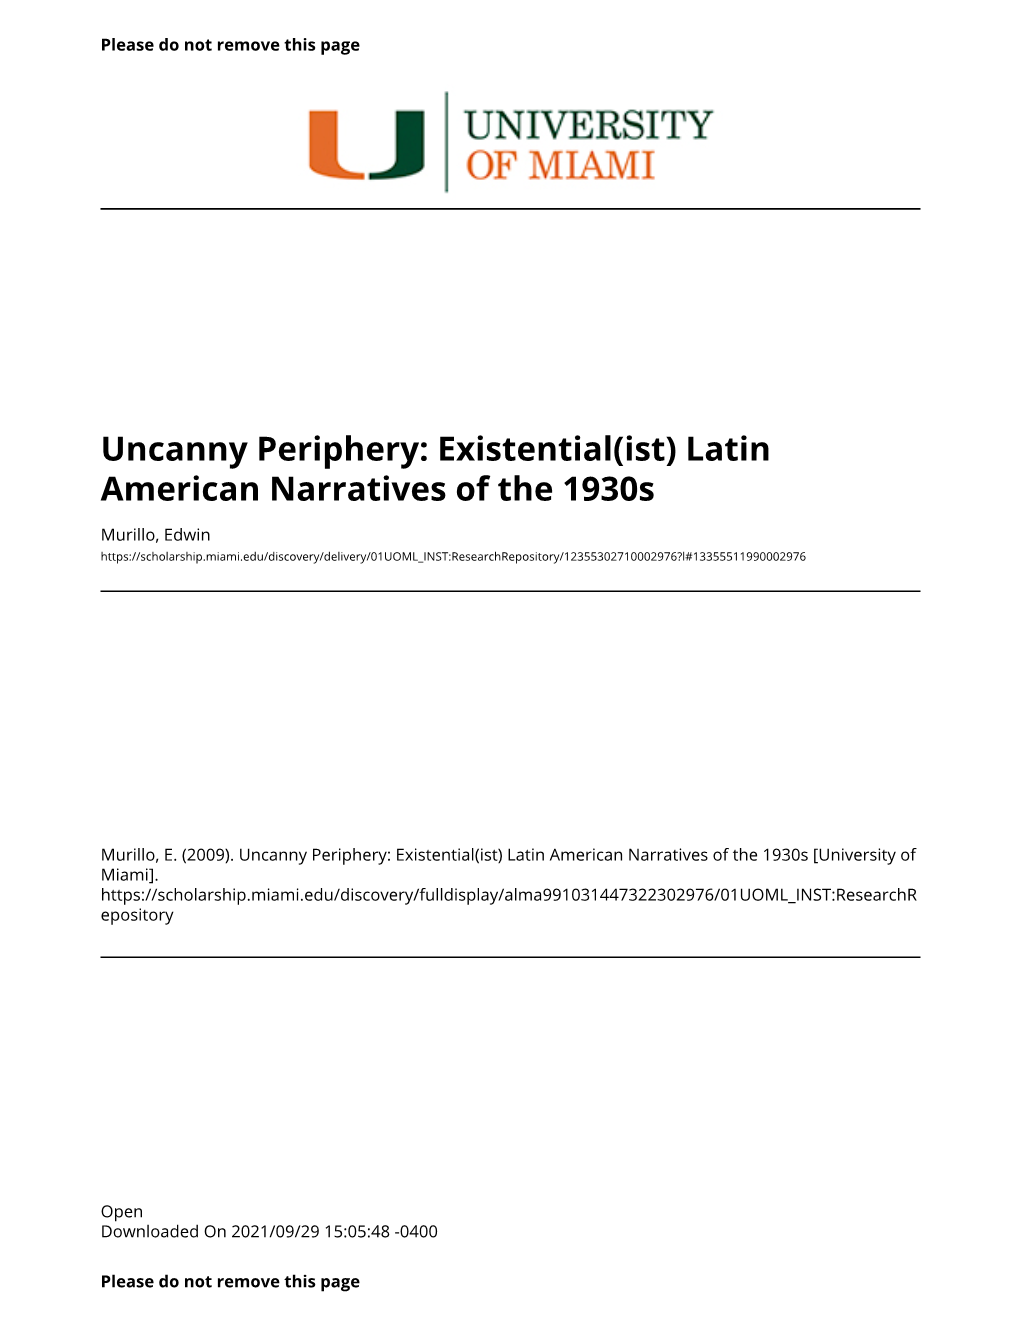 Latin American Narratives of the 1930S